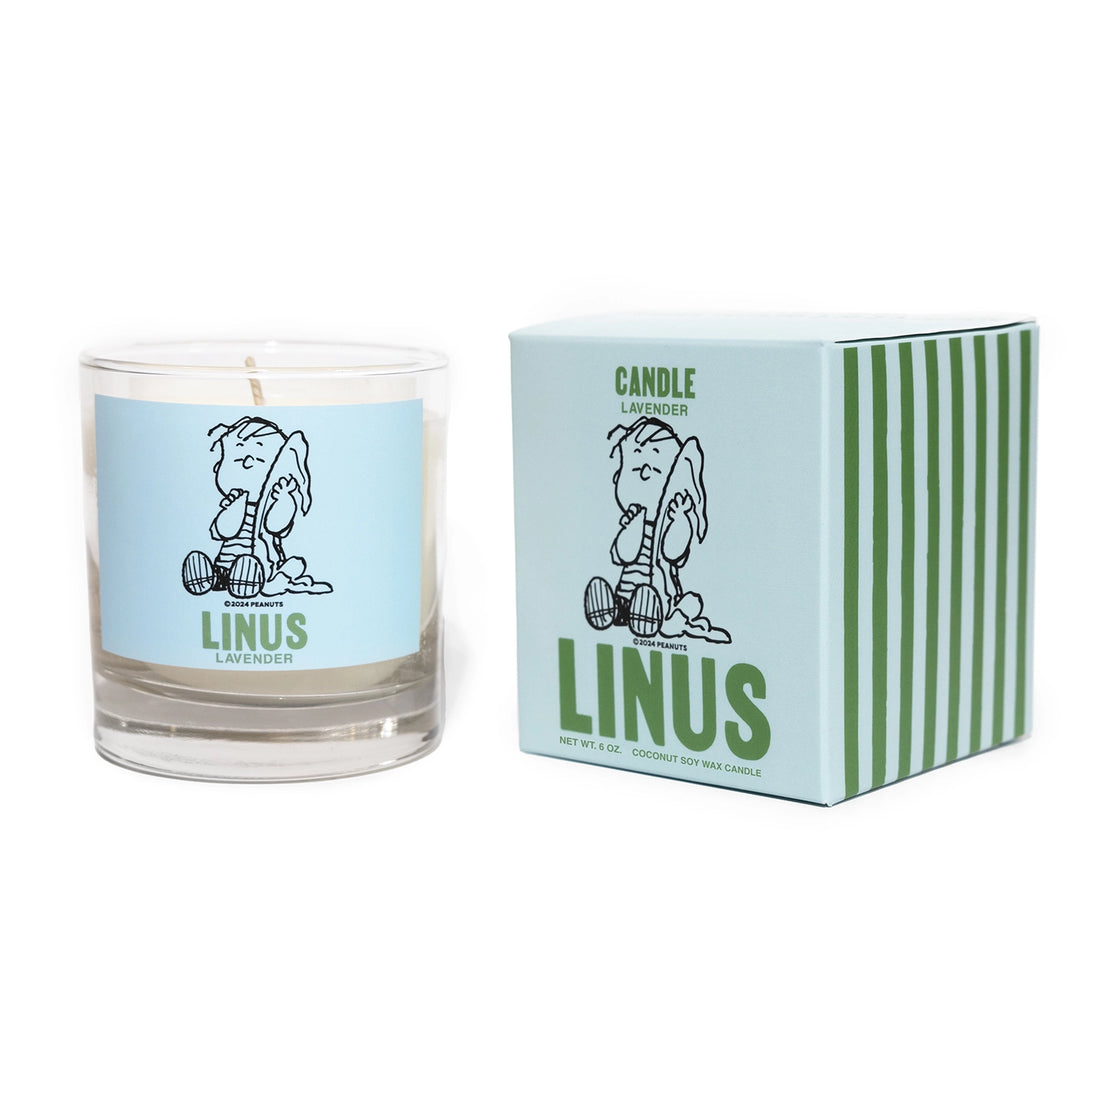 Peanuts Candle Collection